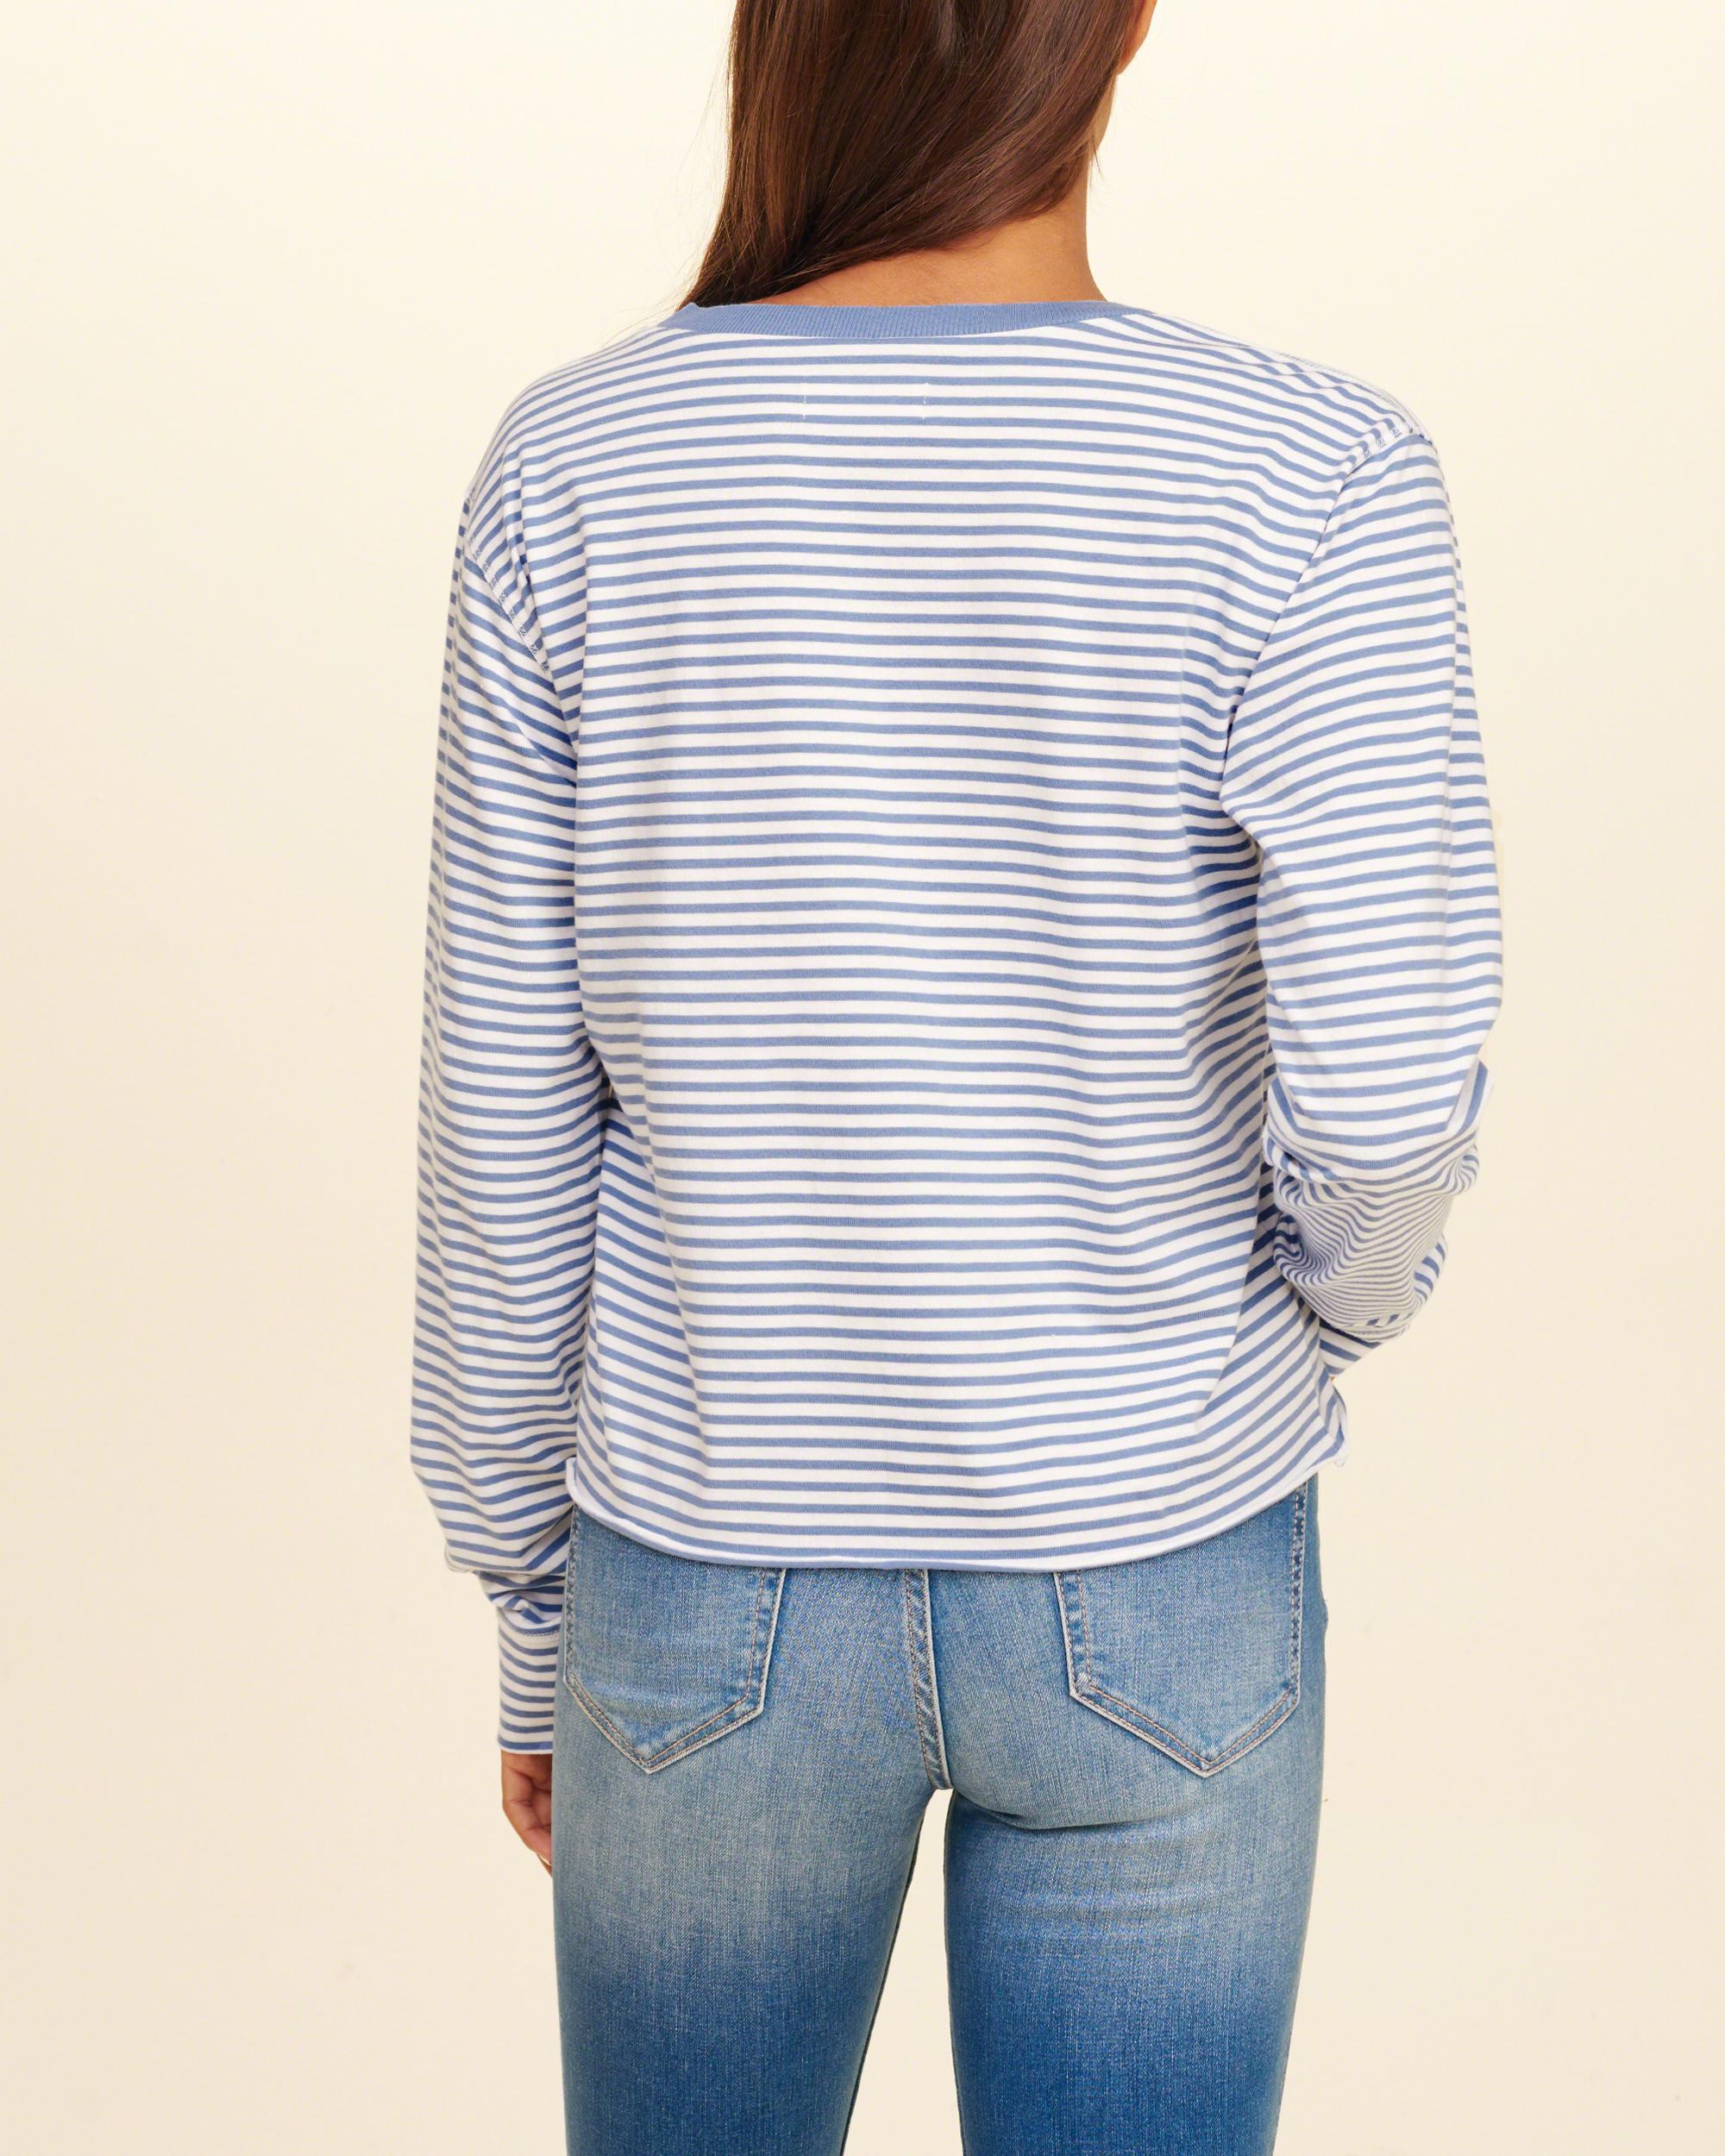 Lyst - Hollister Stripe Lace-up T-shirt in Blue